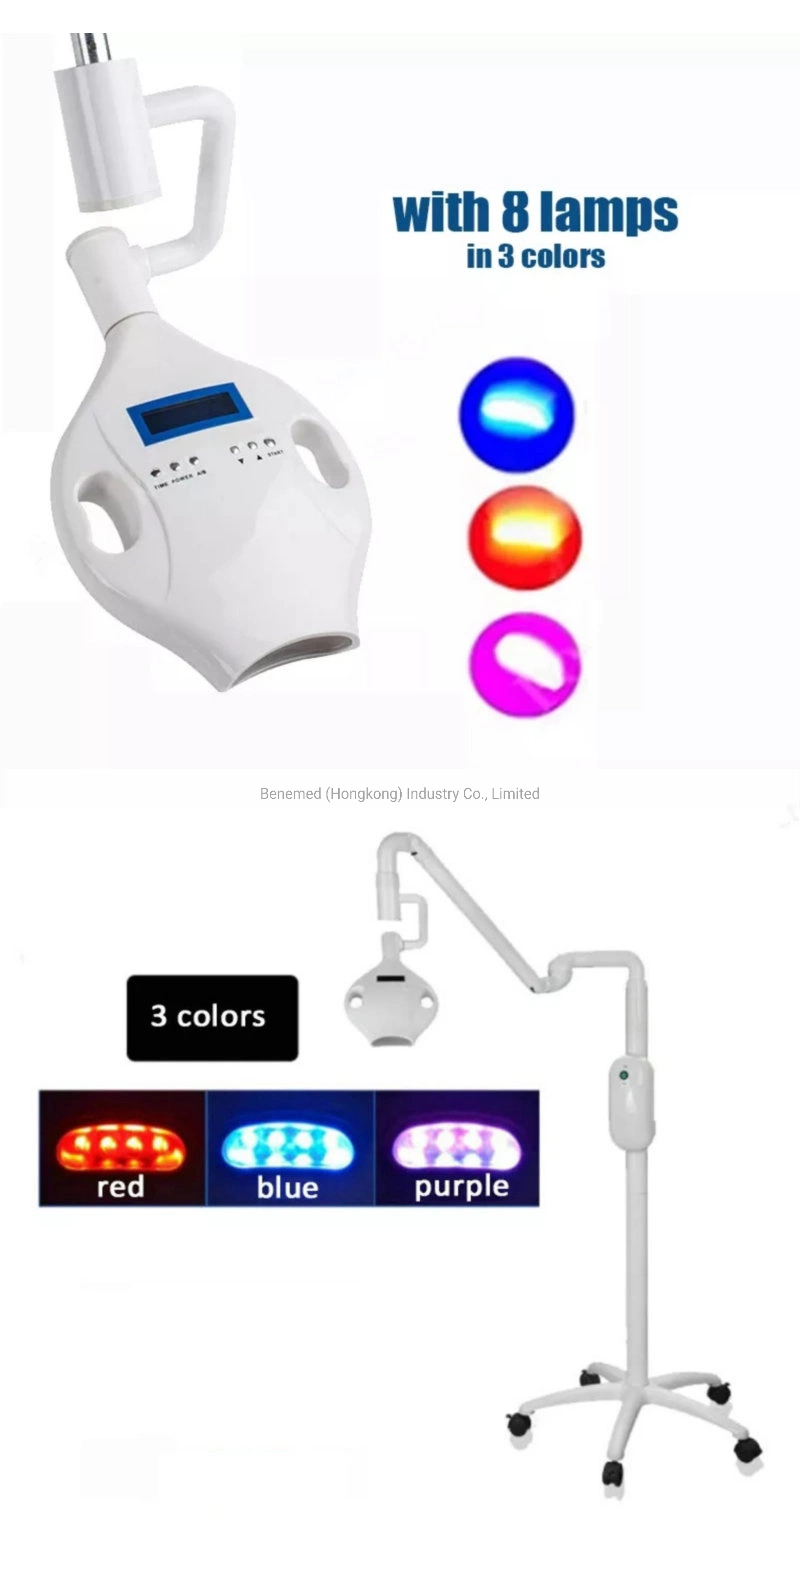 2021 New Dental LED Therapy Cold Lamp Teeth Whitening Machine